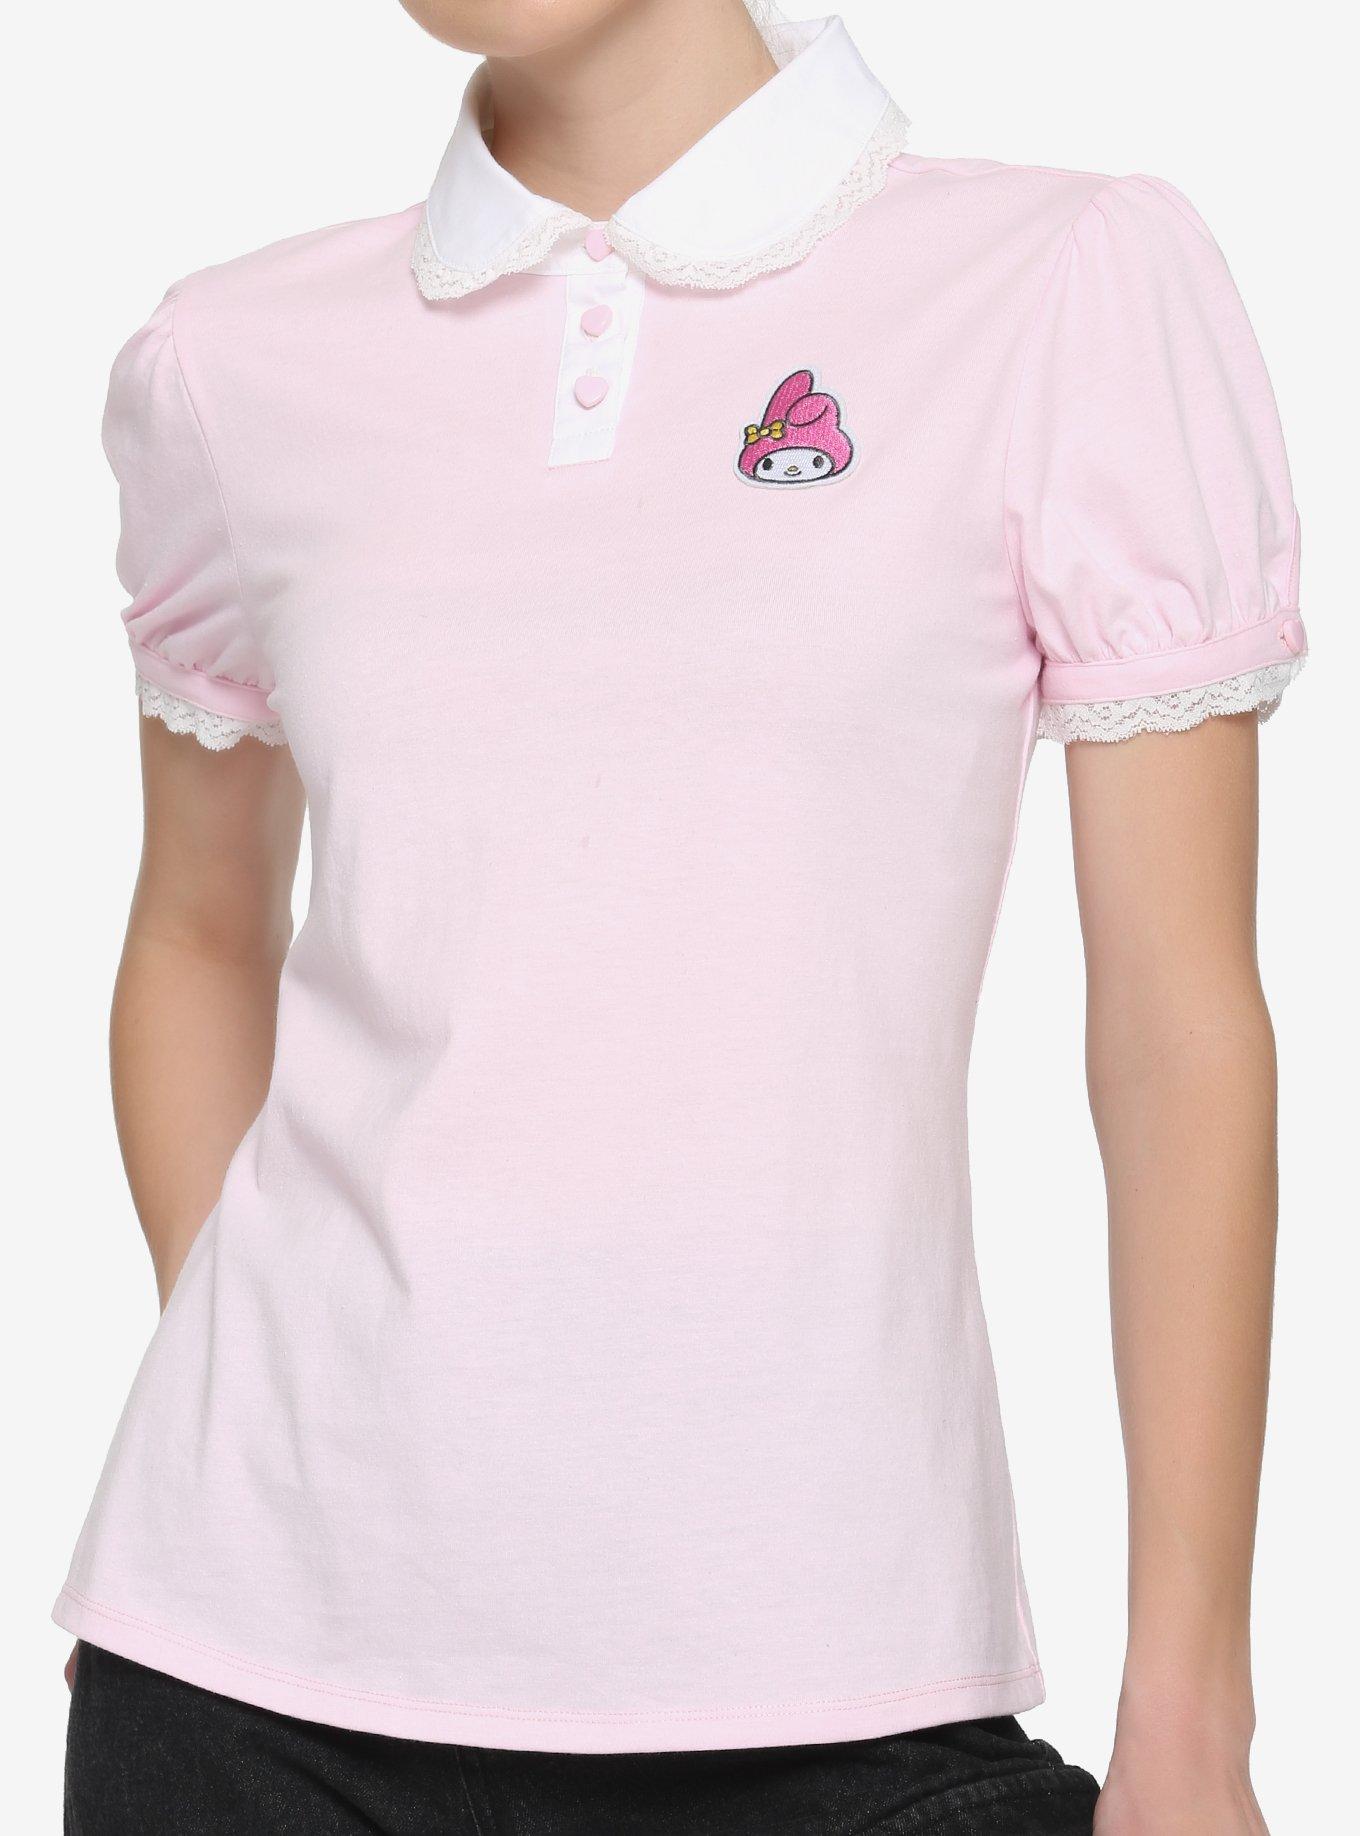 My Melody Pink Collared Girls Top, PINK, hi-res